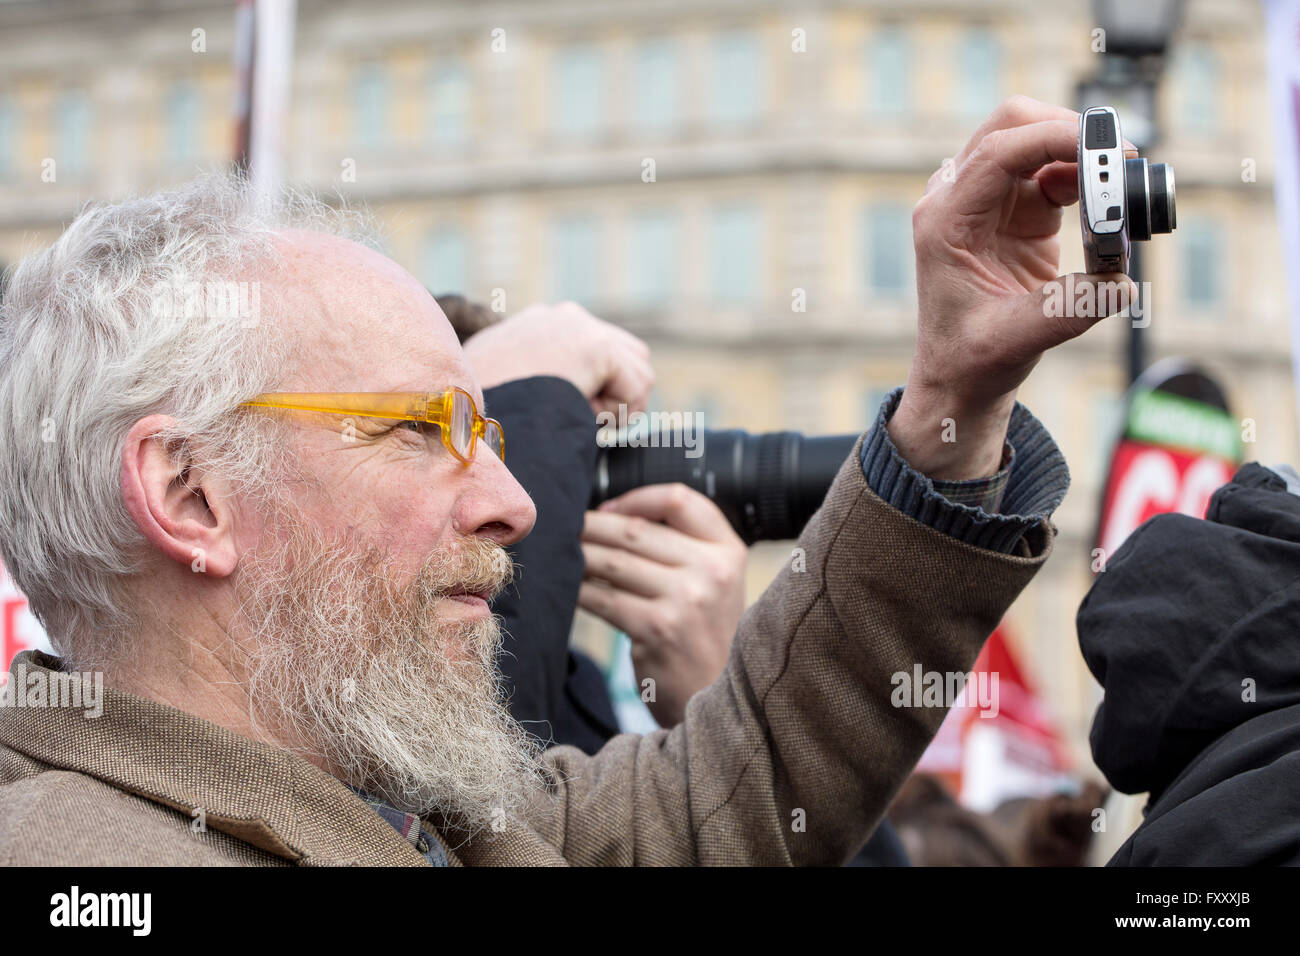 Two cameras at the anti-austerity rally, being used to document the support for the reason behind the demonstration Stock Photo